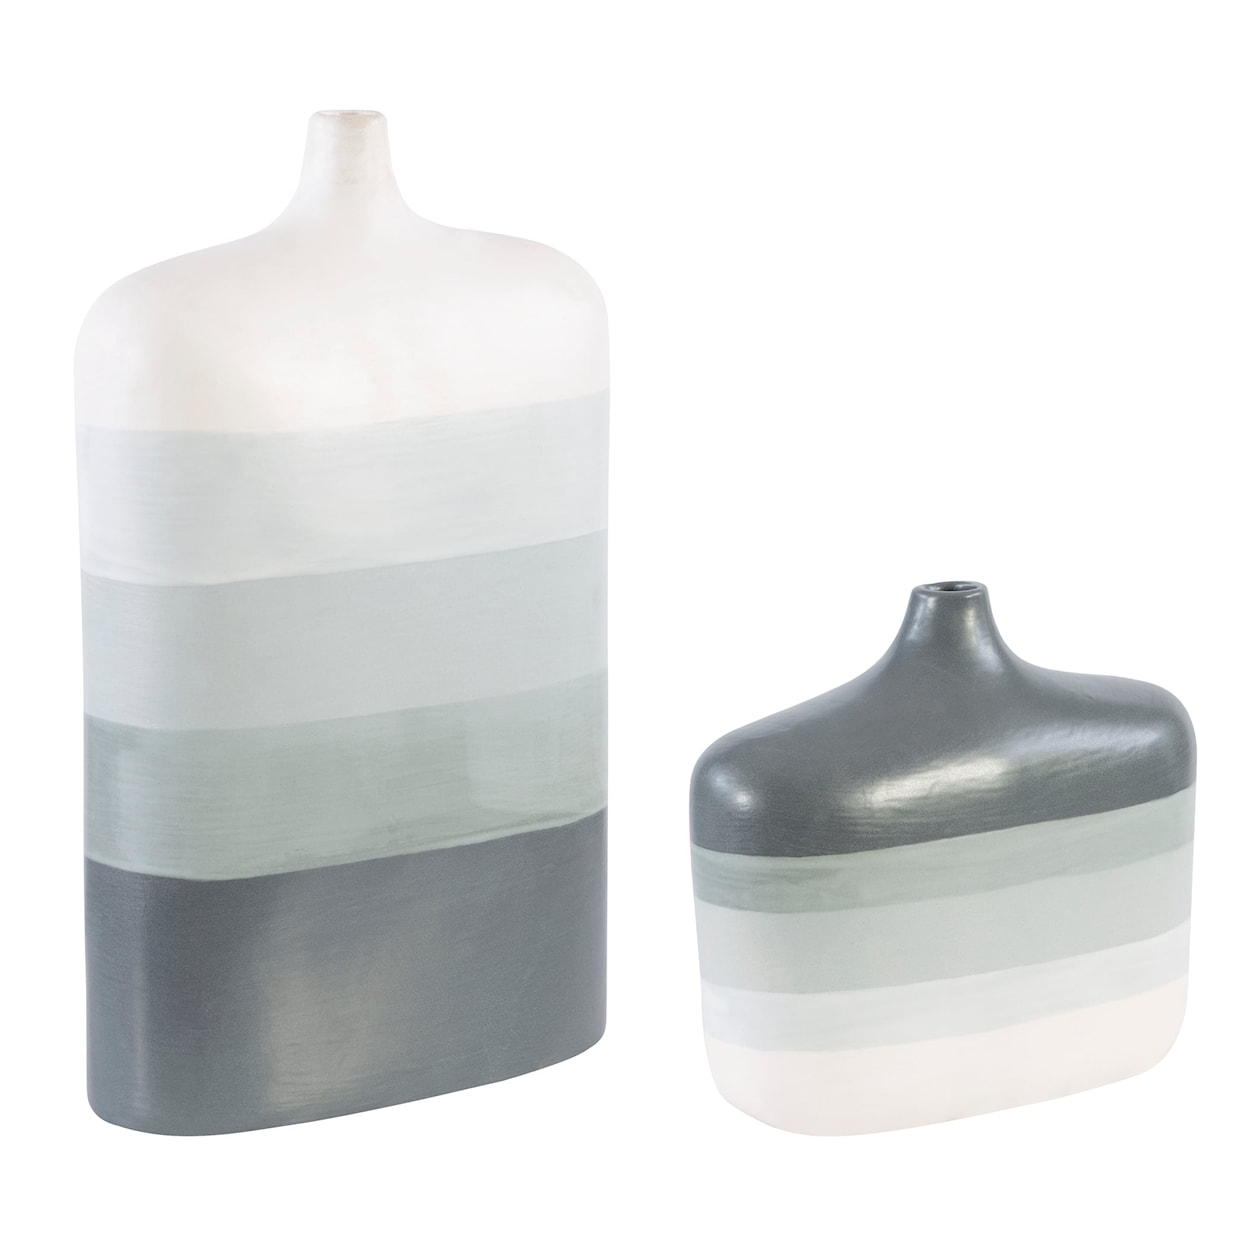 Uttermost Accessories - Vases and Urns Guevara Striped Gray Vases, S/2